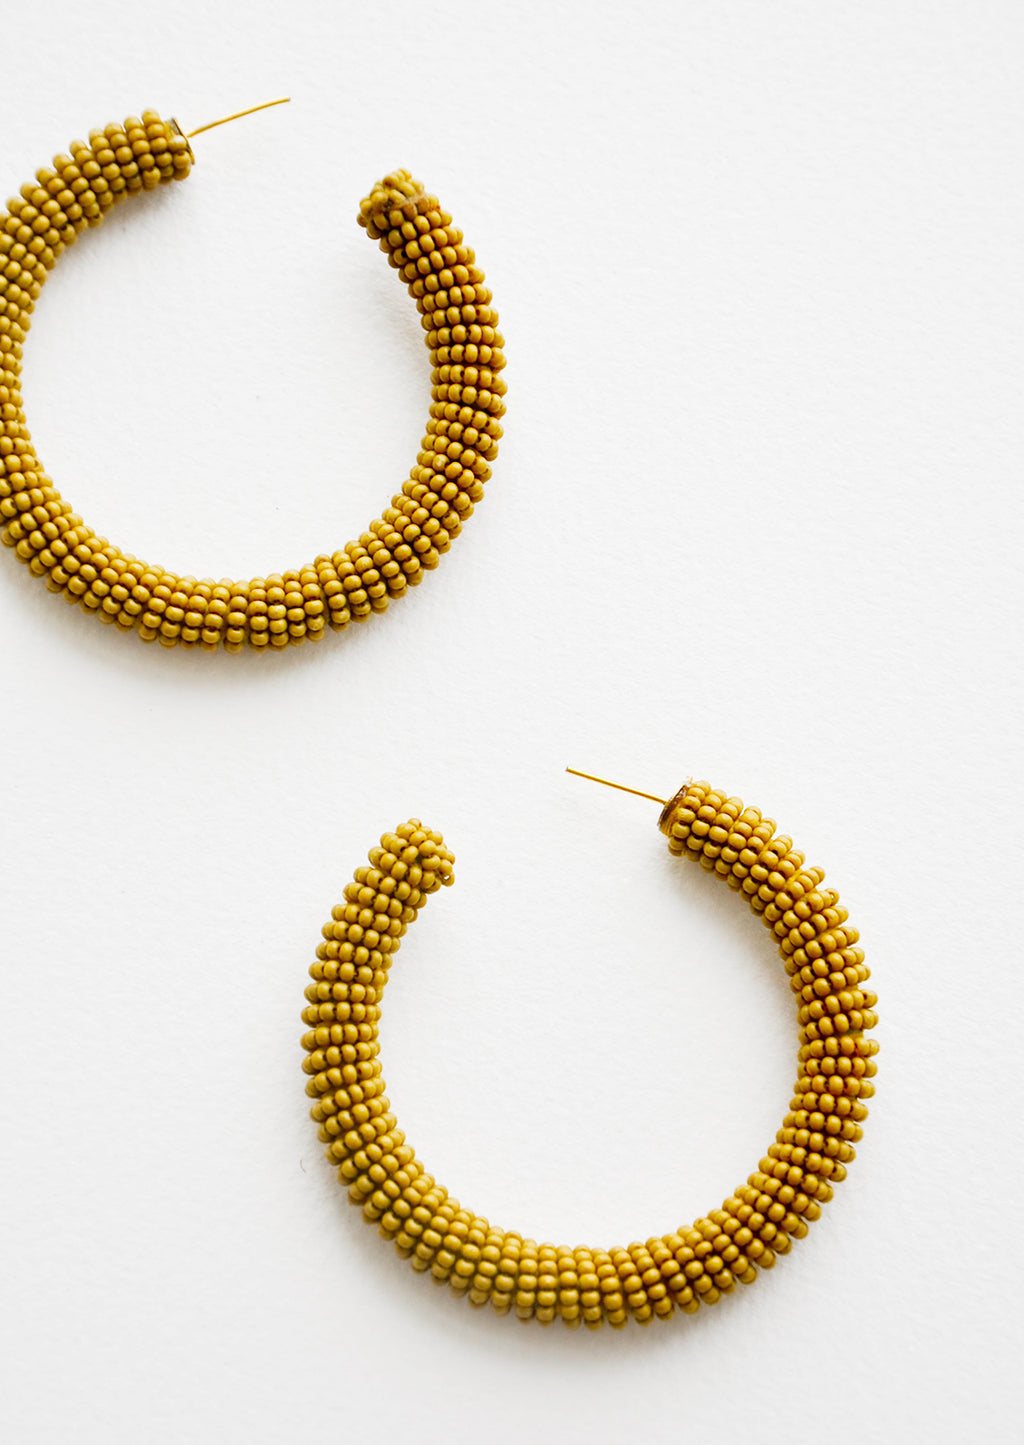 Lichen: Thick hoop earrings of yellow-green colored glass beads.